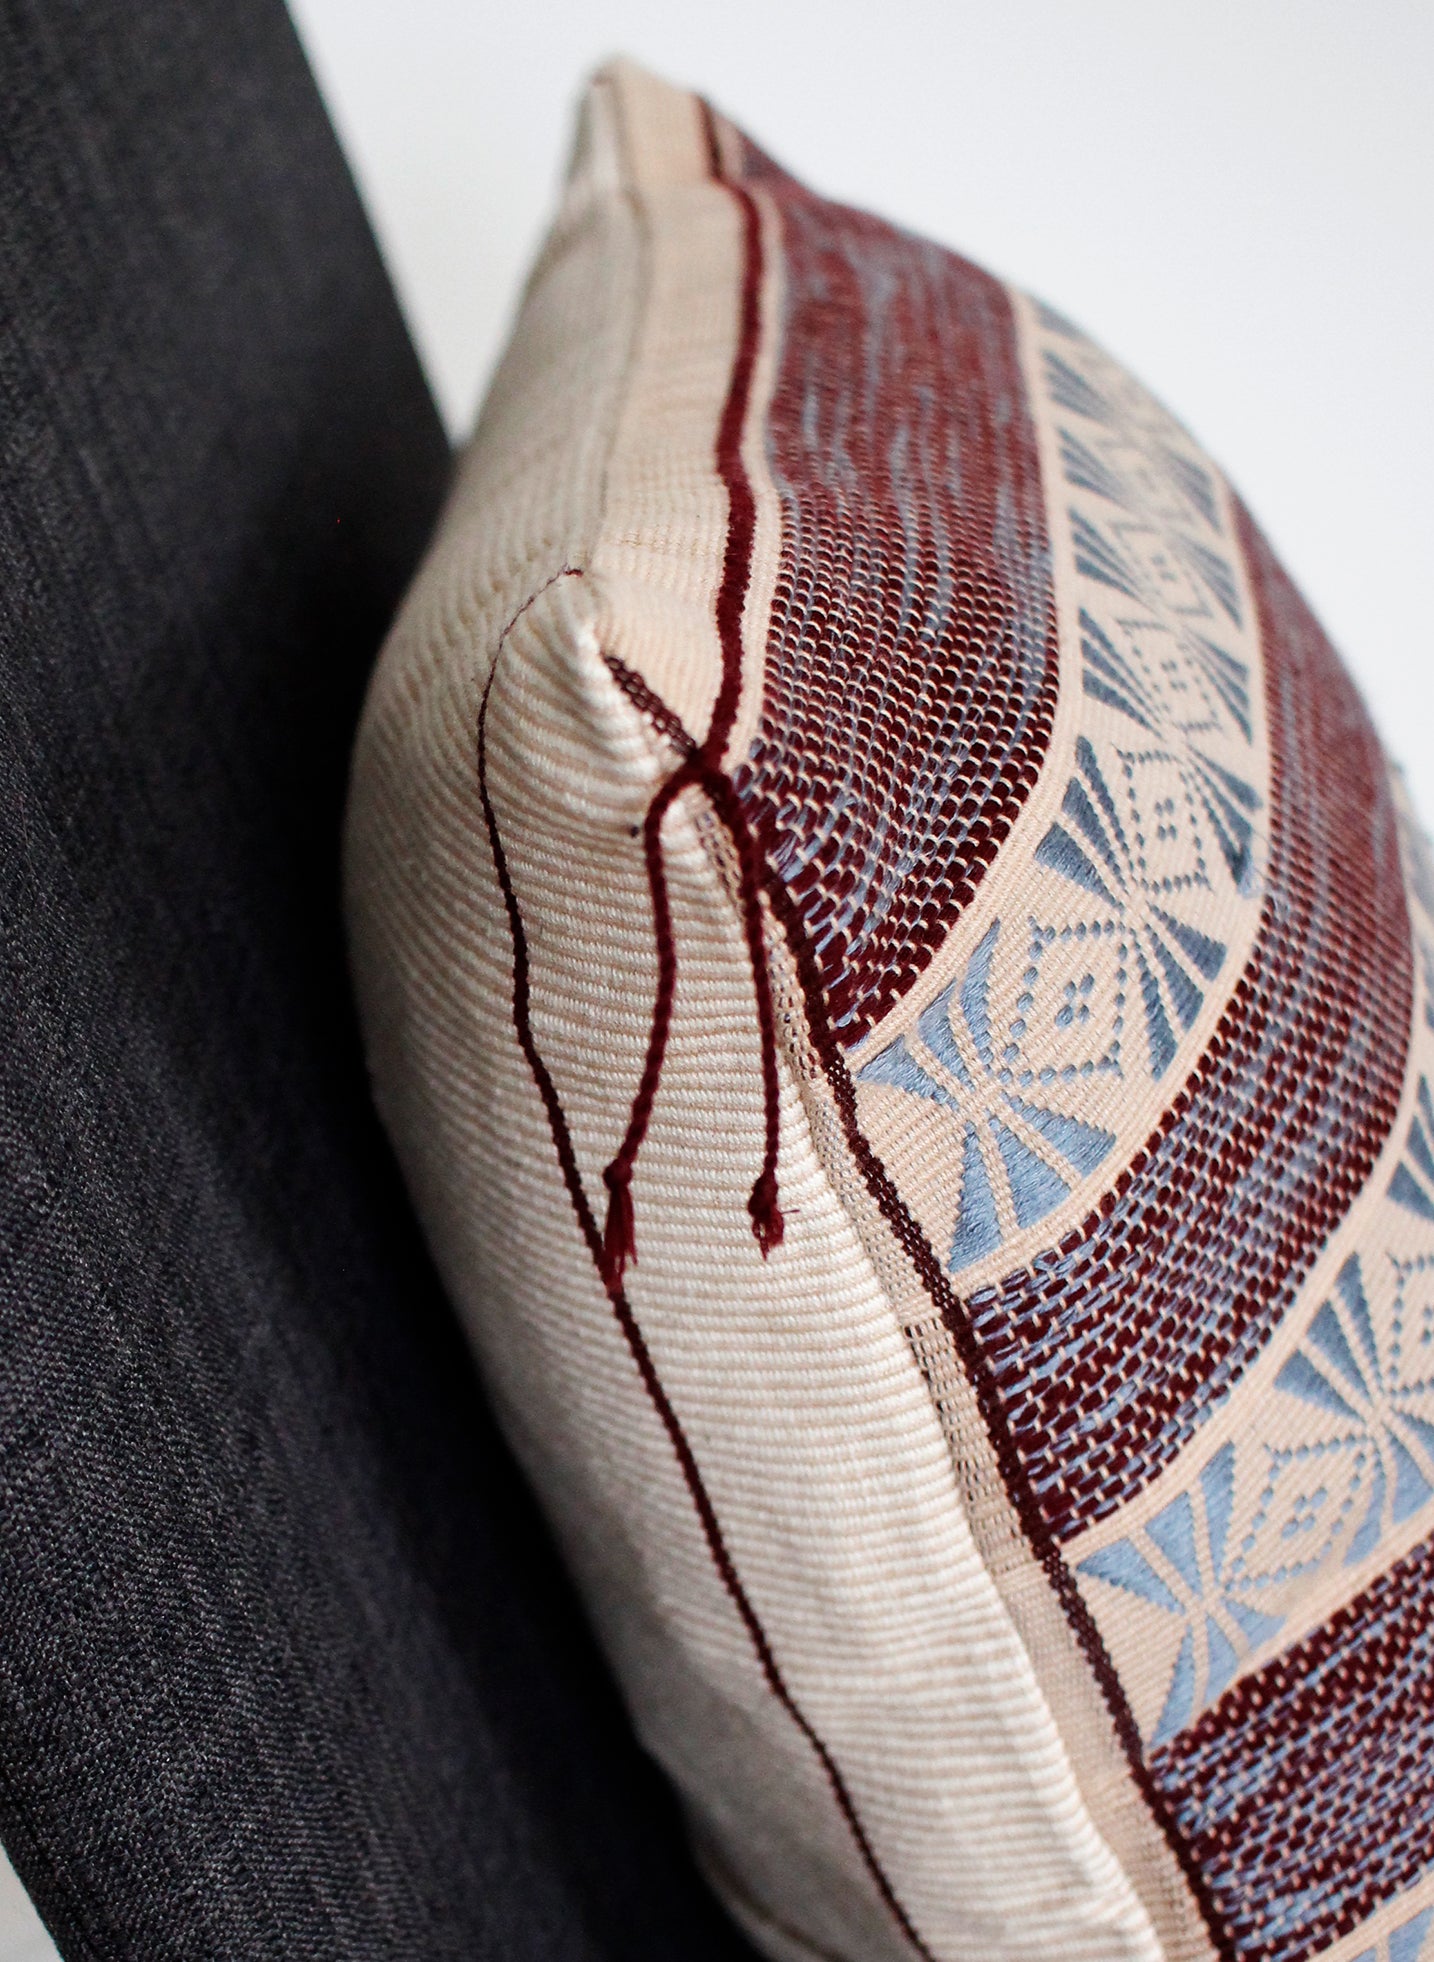 Detail of handwoven cushion in black and red pattern with tassel on the corner